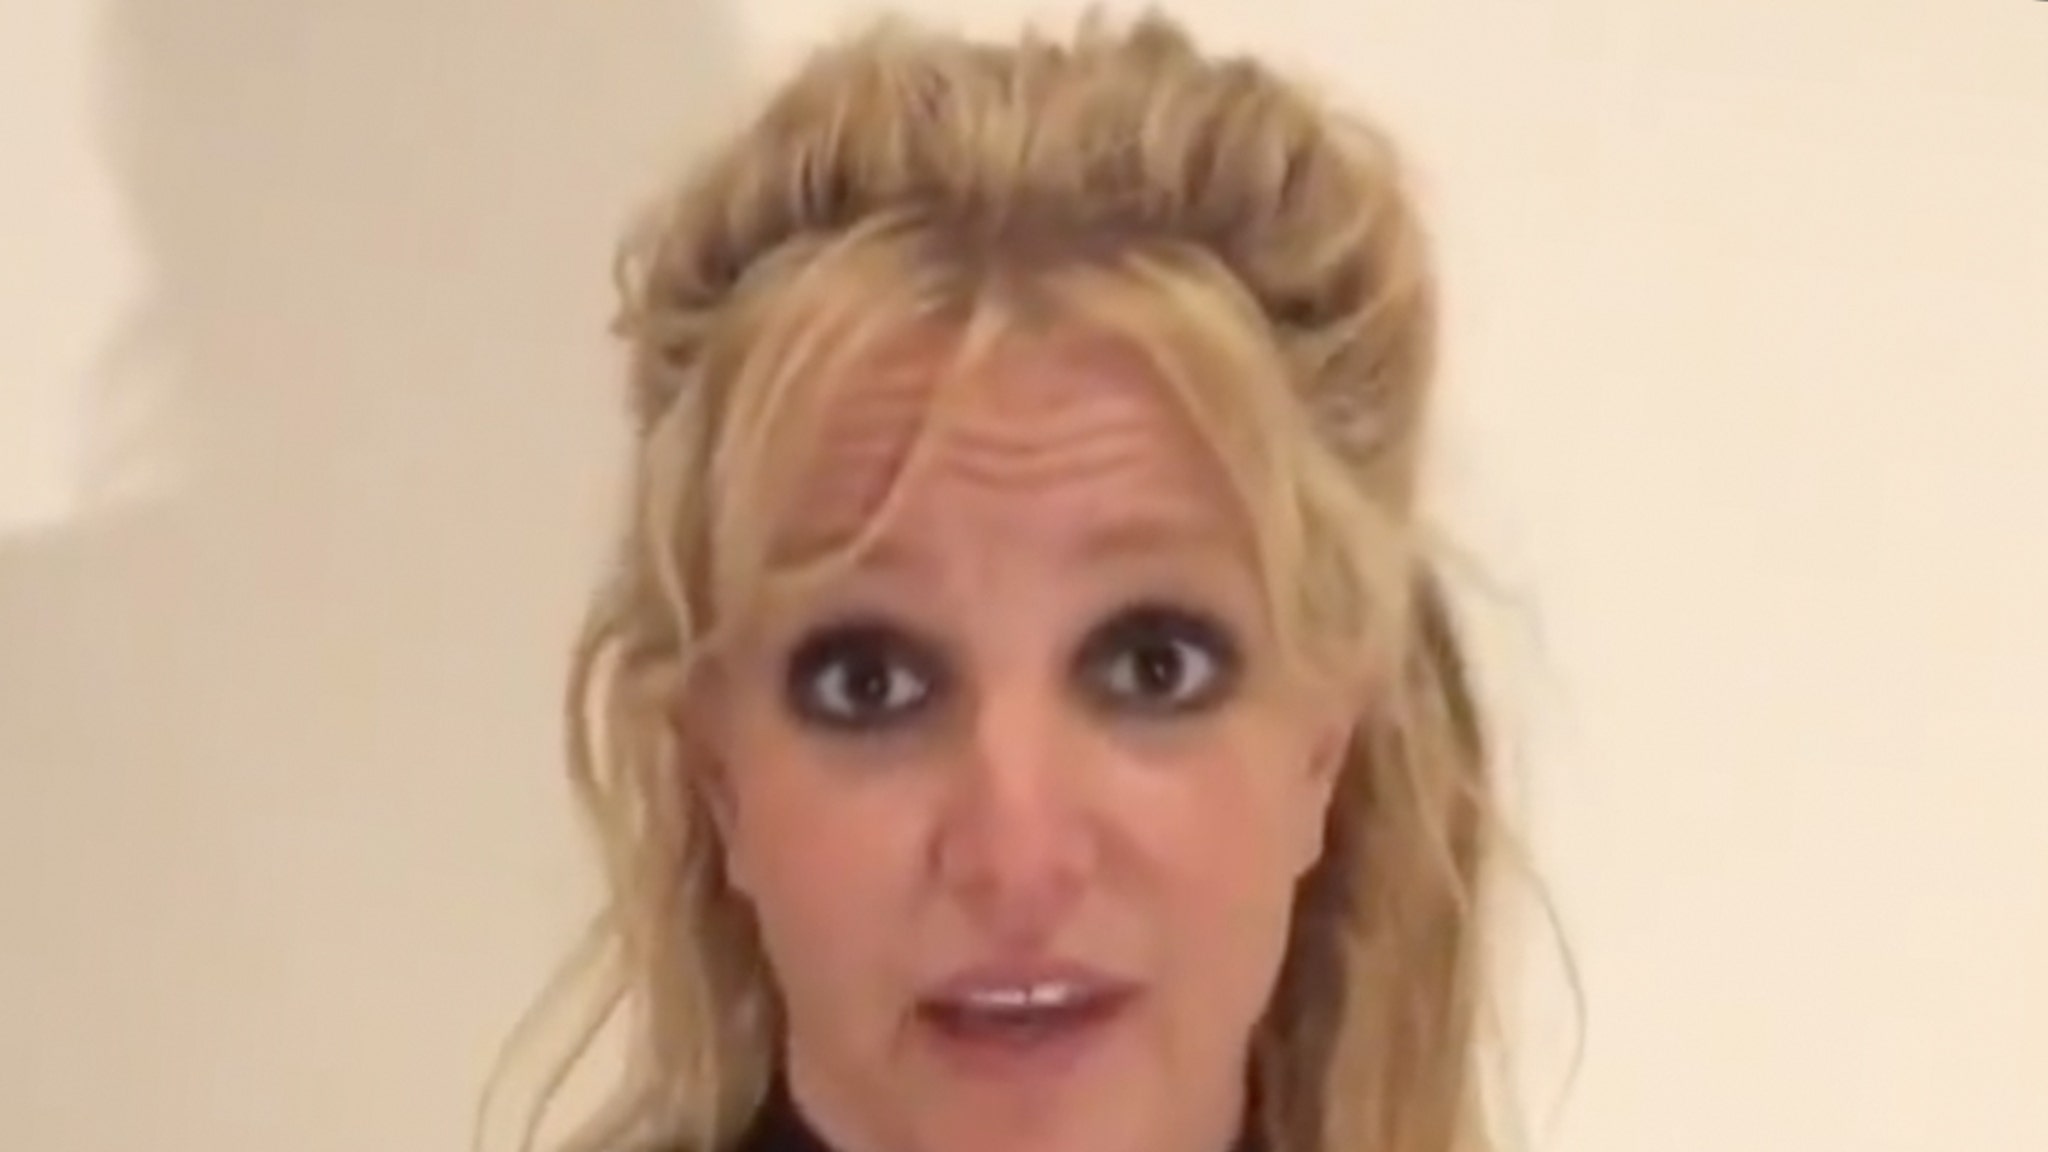 Britney Spears Slams Docs and Specials About Her Without Authorization